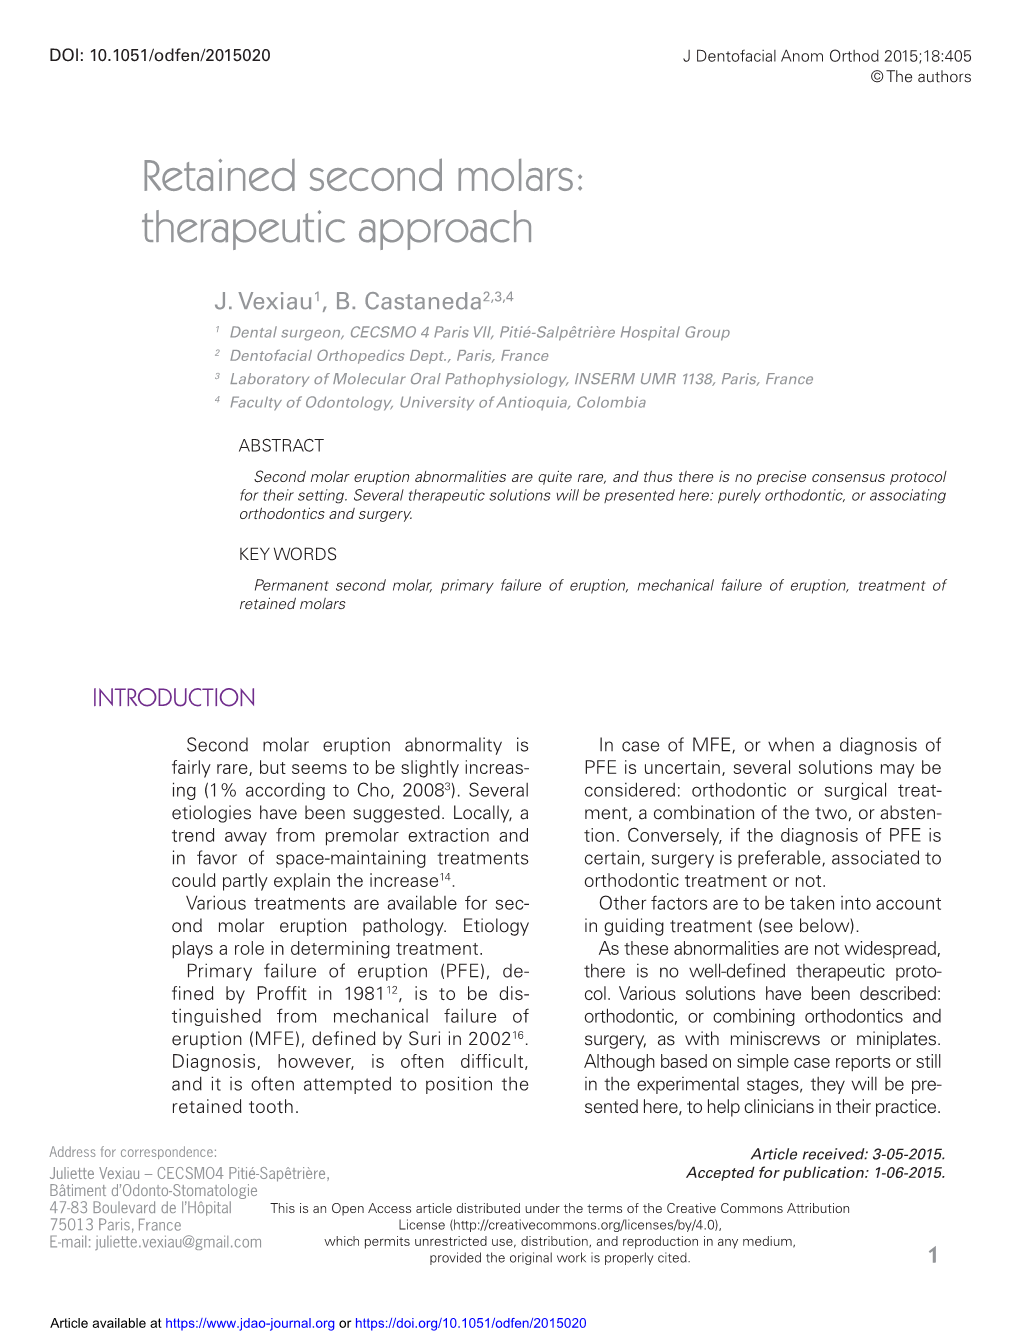 Retained Second Molars: Therapeutic Approach